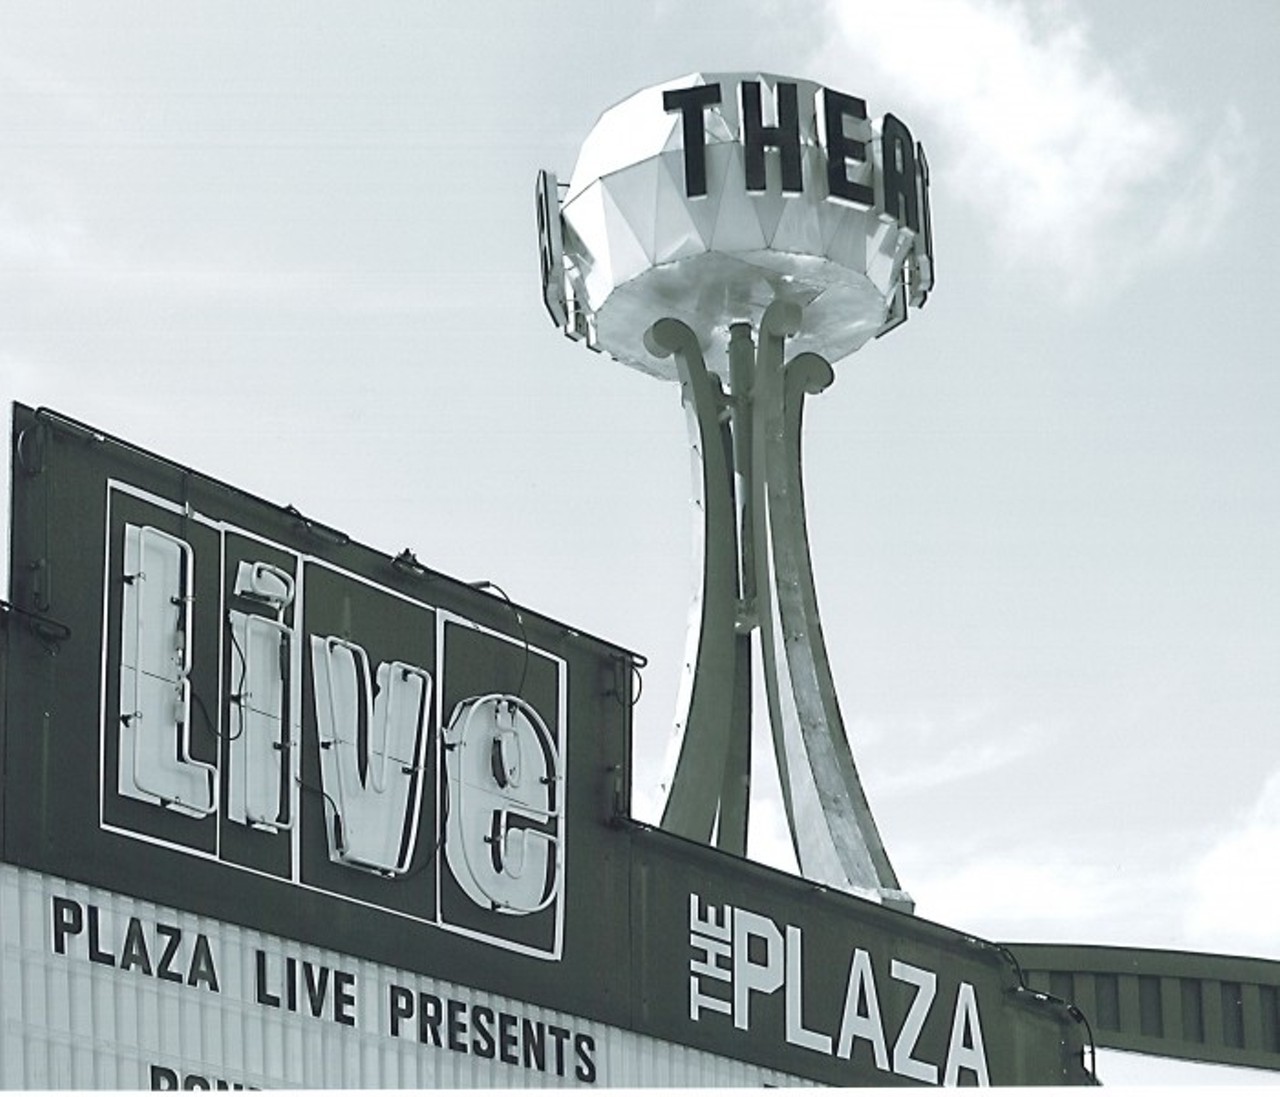 Plaza Theatre Sign
425 N. Bumby Ave.
This roof-top sign is the only unchanged theater sign from the 1960&#146;s. The theater opened in 1963 with the John Wayne movie, &#147;McLintock&#148;, and closed in 1992. The building is known today as The Plaza Live which is home to live musical acts and shows.
Photo via City of Orlando